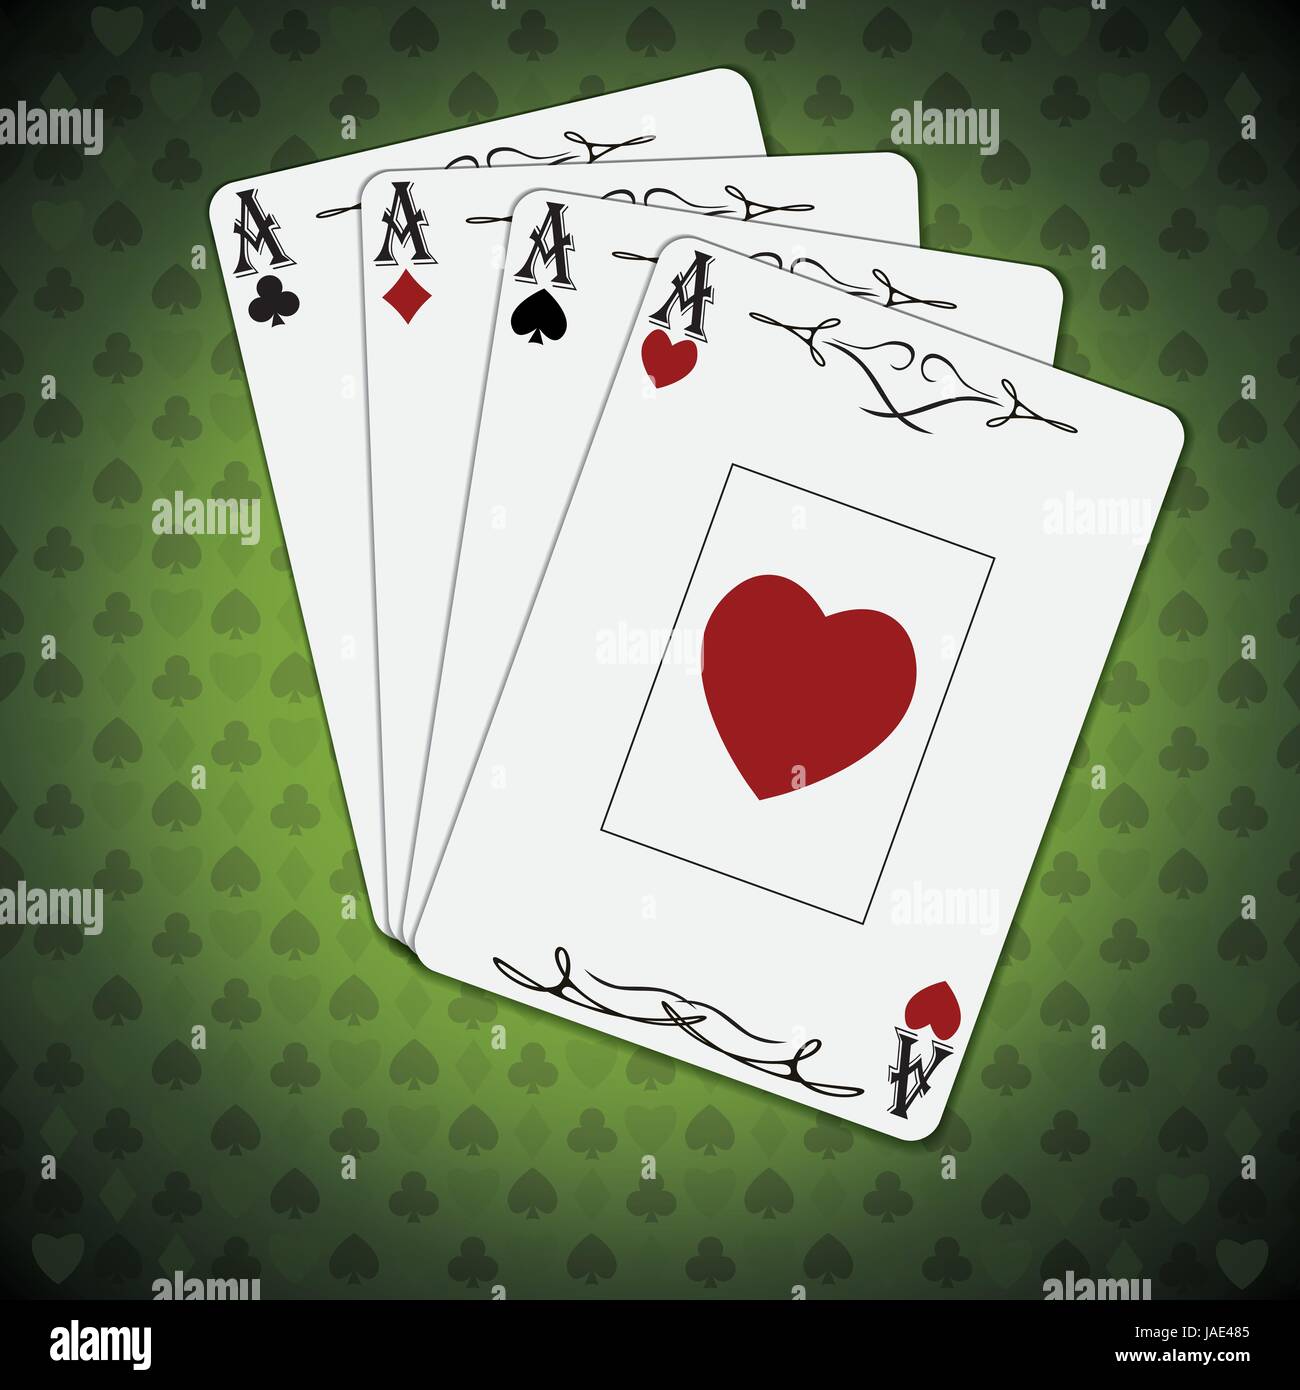 Ace of spades, ace of hearts, ace of diamonds, ace of clubs poker cards set green background Stock Vector